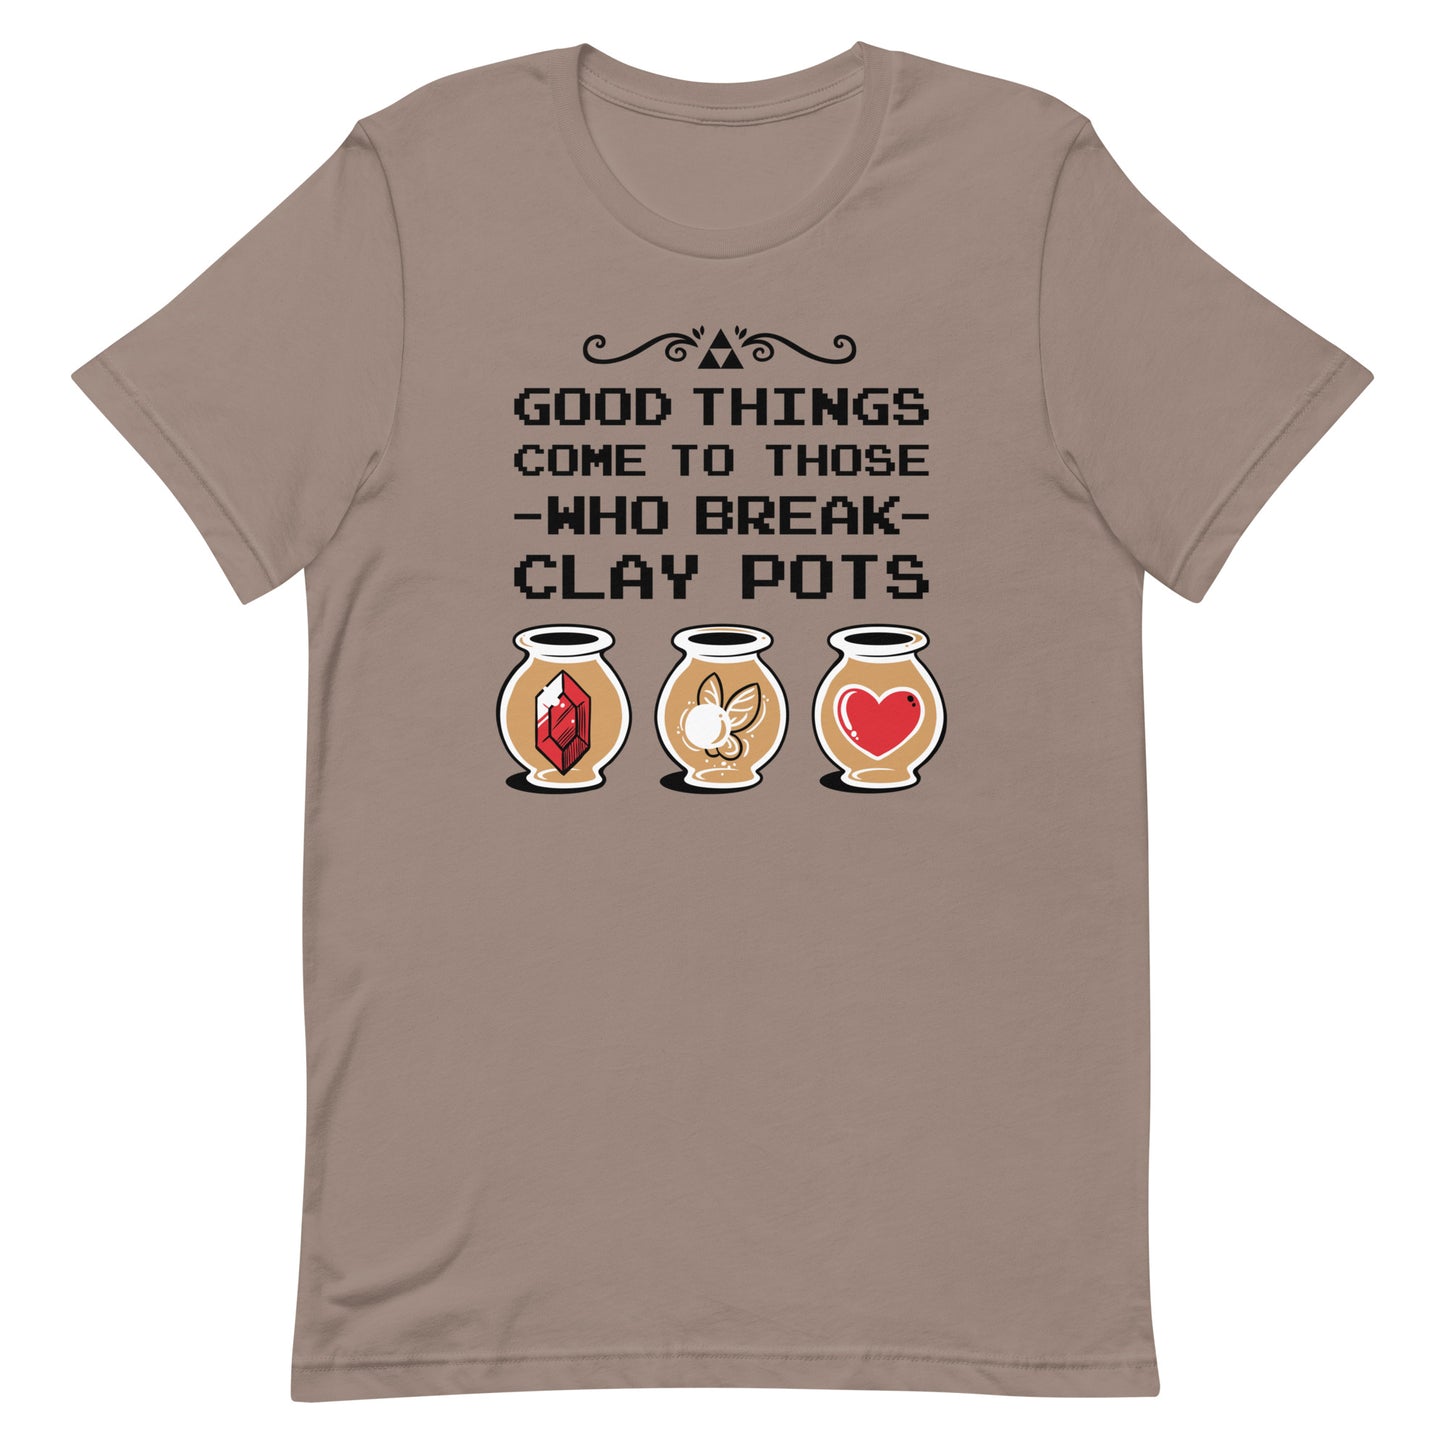 Good Things Come To Those Who Break Clay Pots Men's Signature Tee